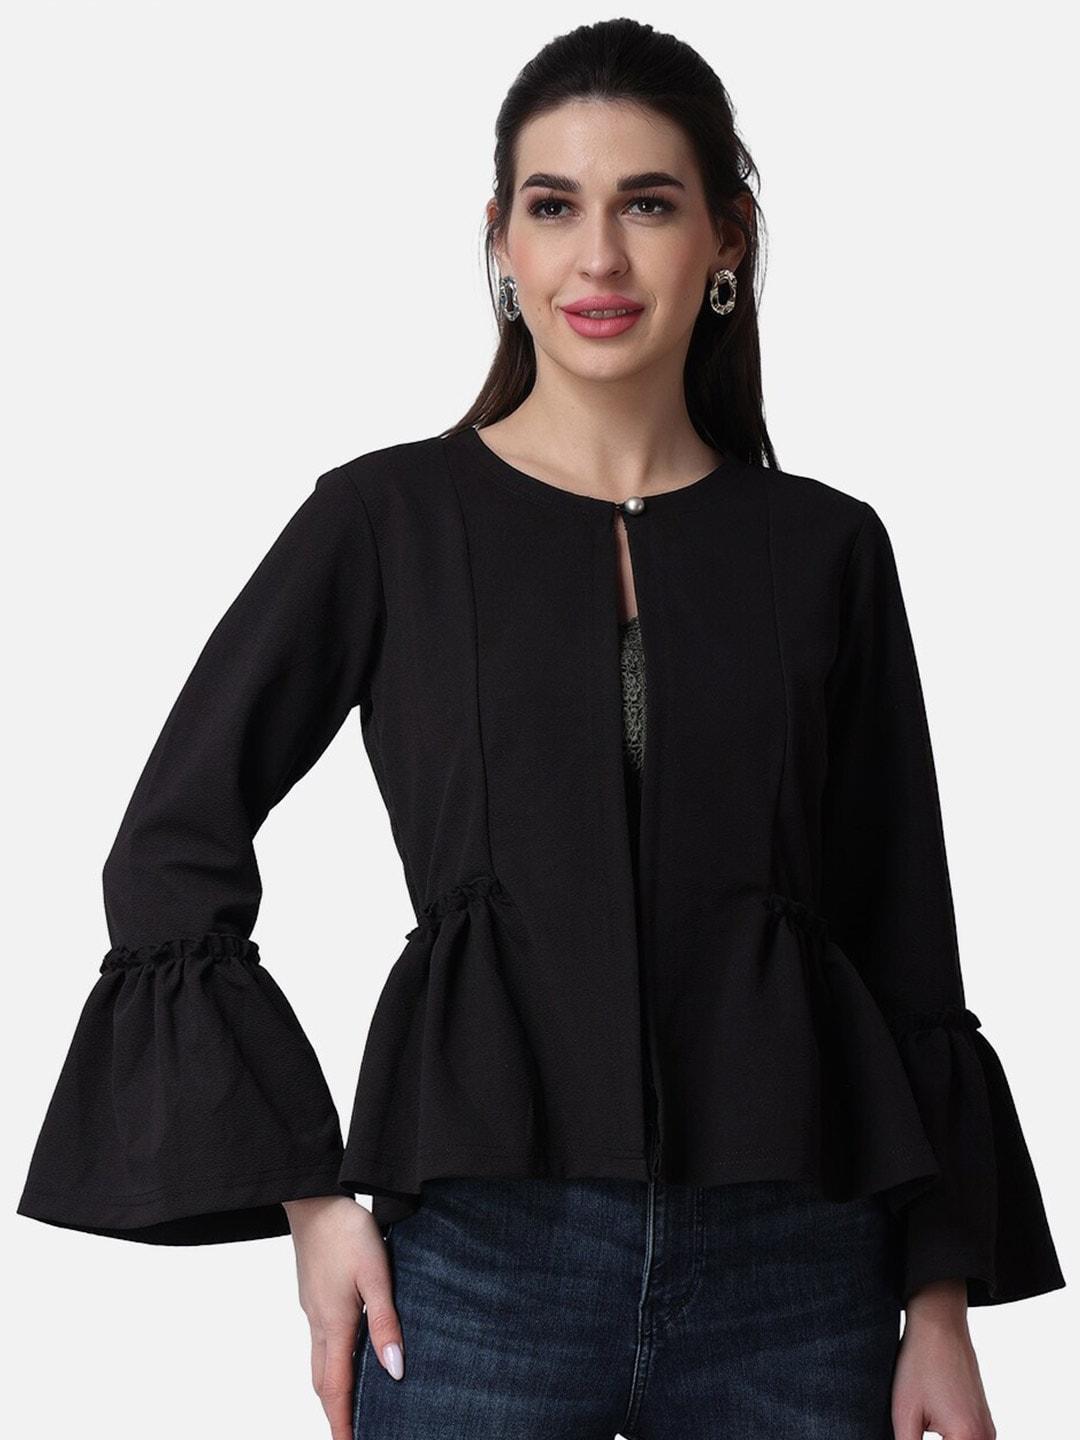 popwings-women-bell-sleeves-gathers-button-closure-shrug